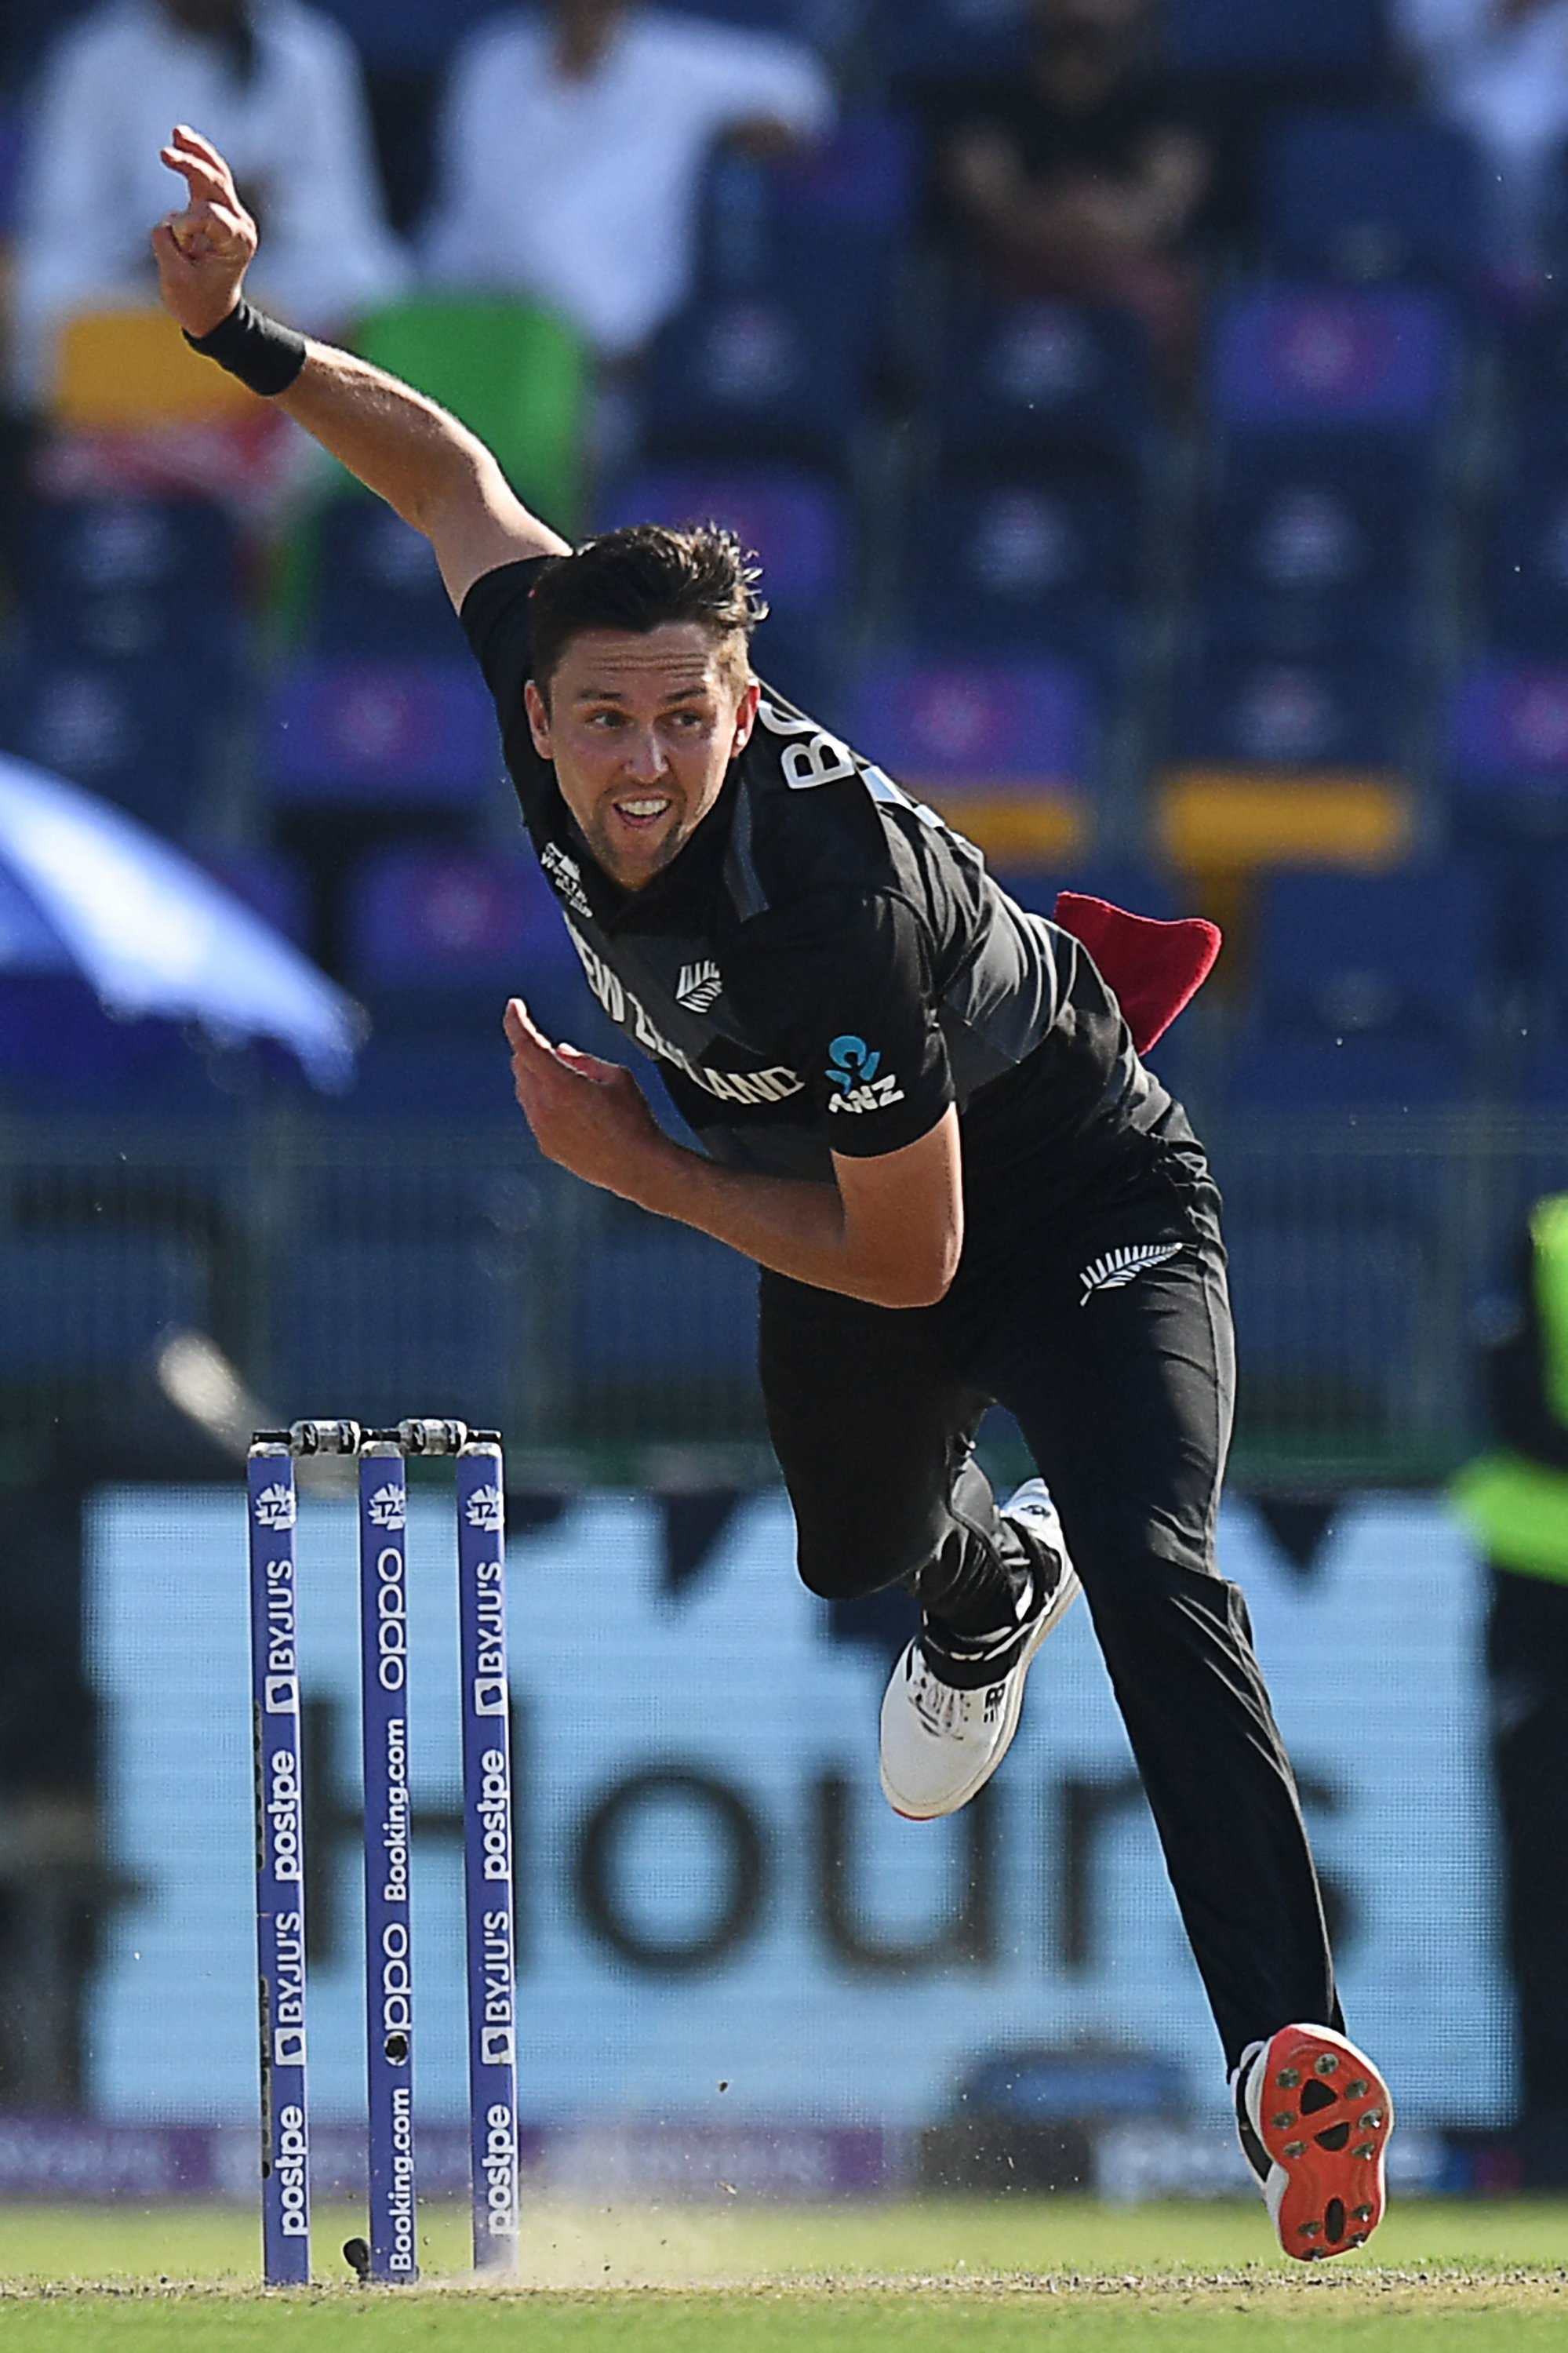 New Zealand's Trent Boult balls during an ICC men's T20 World Cup match against Afghanistan at the Sheikh Zayed Cricket Stadium in Abu Dhabi, UAE, Nov. 7, 2021. (AFP Photo)